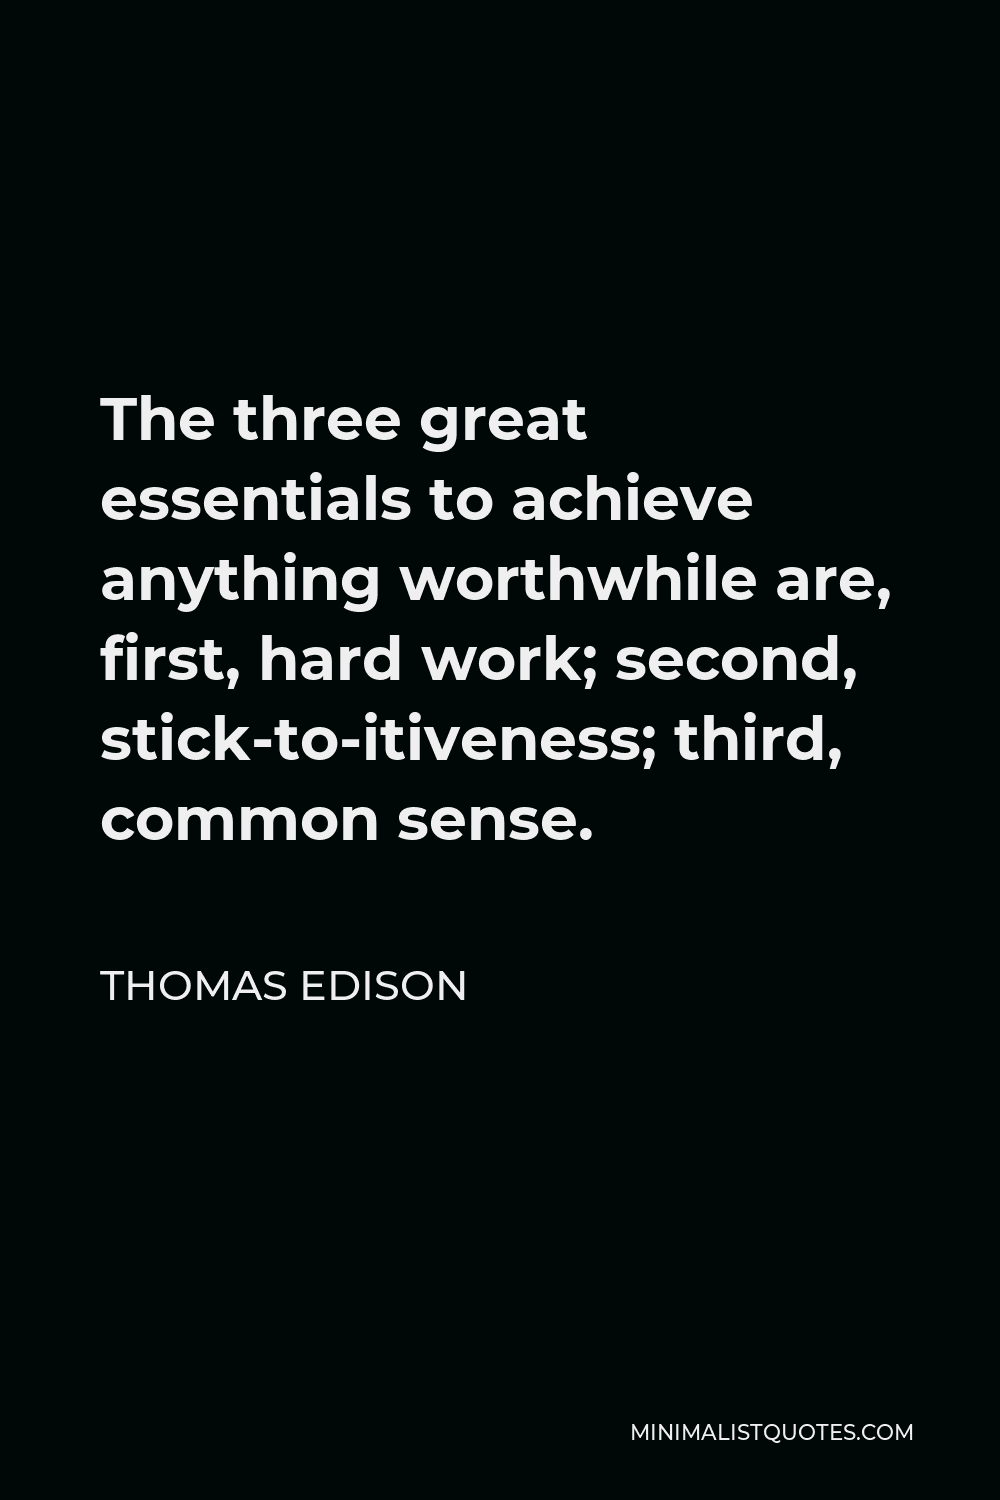 Thomas Edison Quote - The three great essentials to achieve anything worthwhile are, first, hard work; second, stick-to-itiveness; third, common sense.